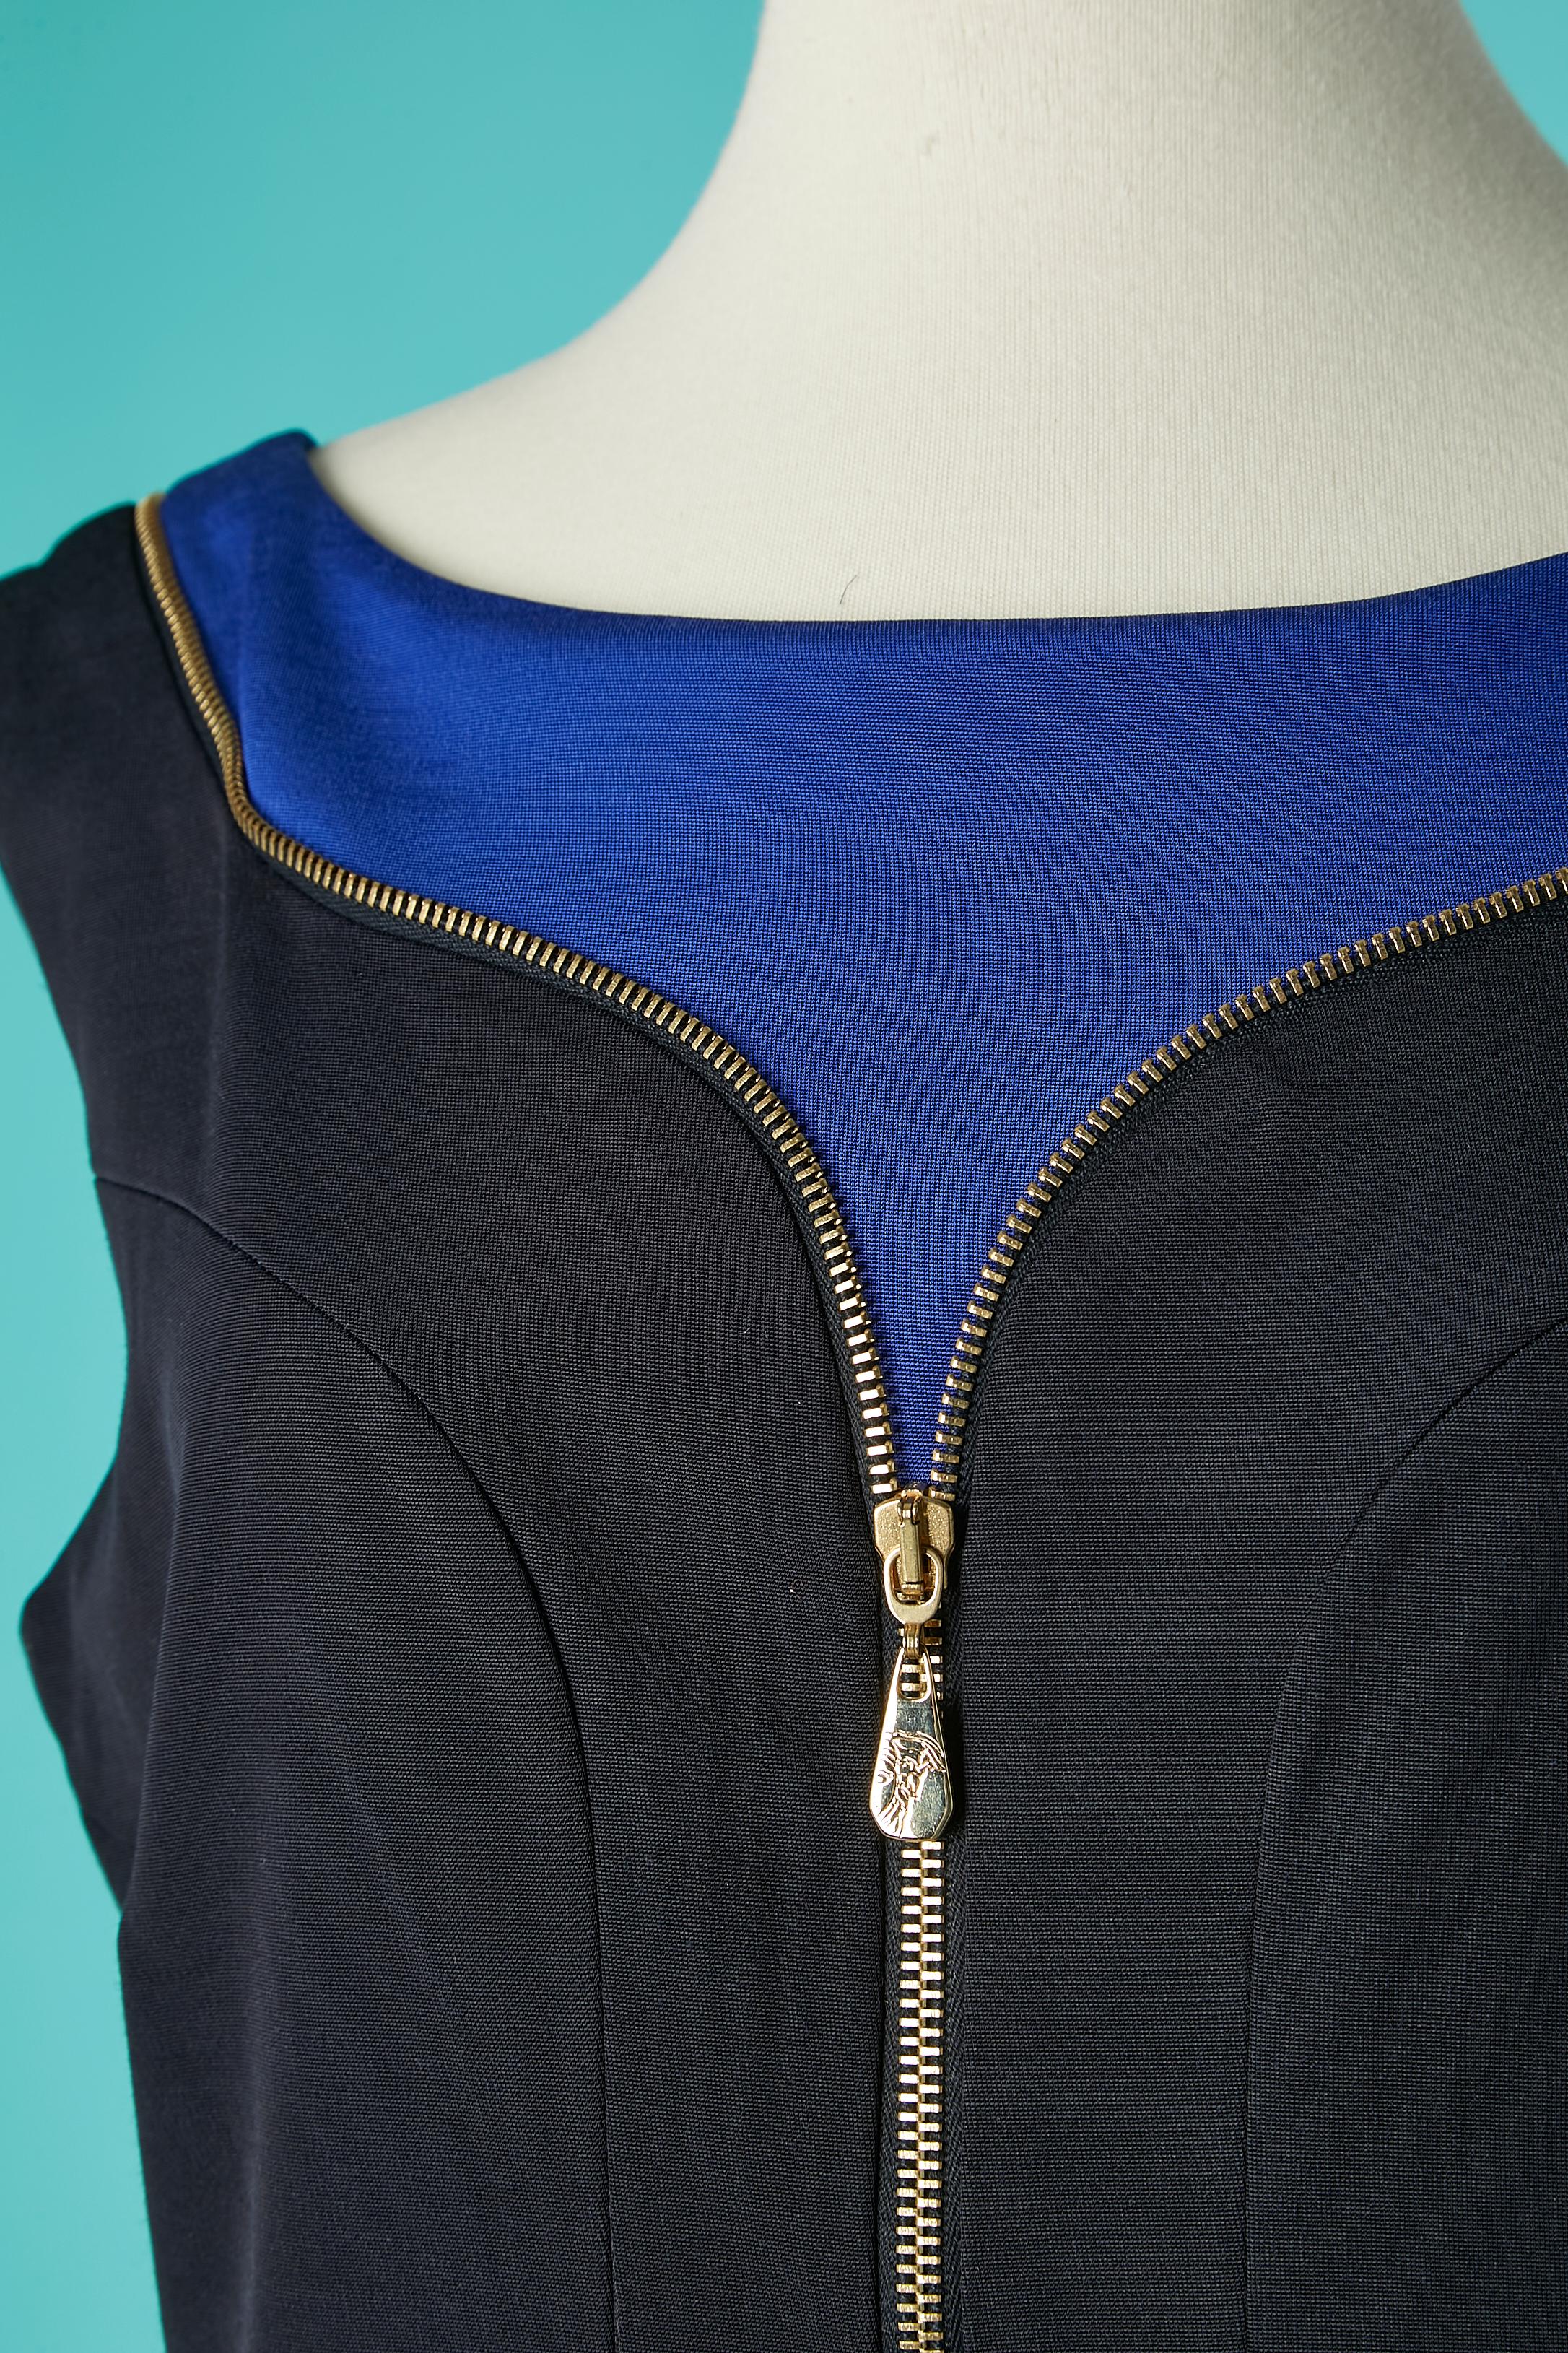 Black and blue cocktail dress with gold metal zip. Main fabric composition: 57% rayon, 41% modal, 20% stretch. Lining: 67% rayon, 33% PBT Elite 
The front gold zip is only decorative, there is an invisible zip in the middle back. 
SIZE 48 (It) 44